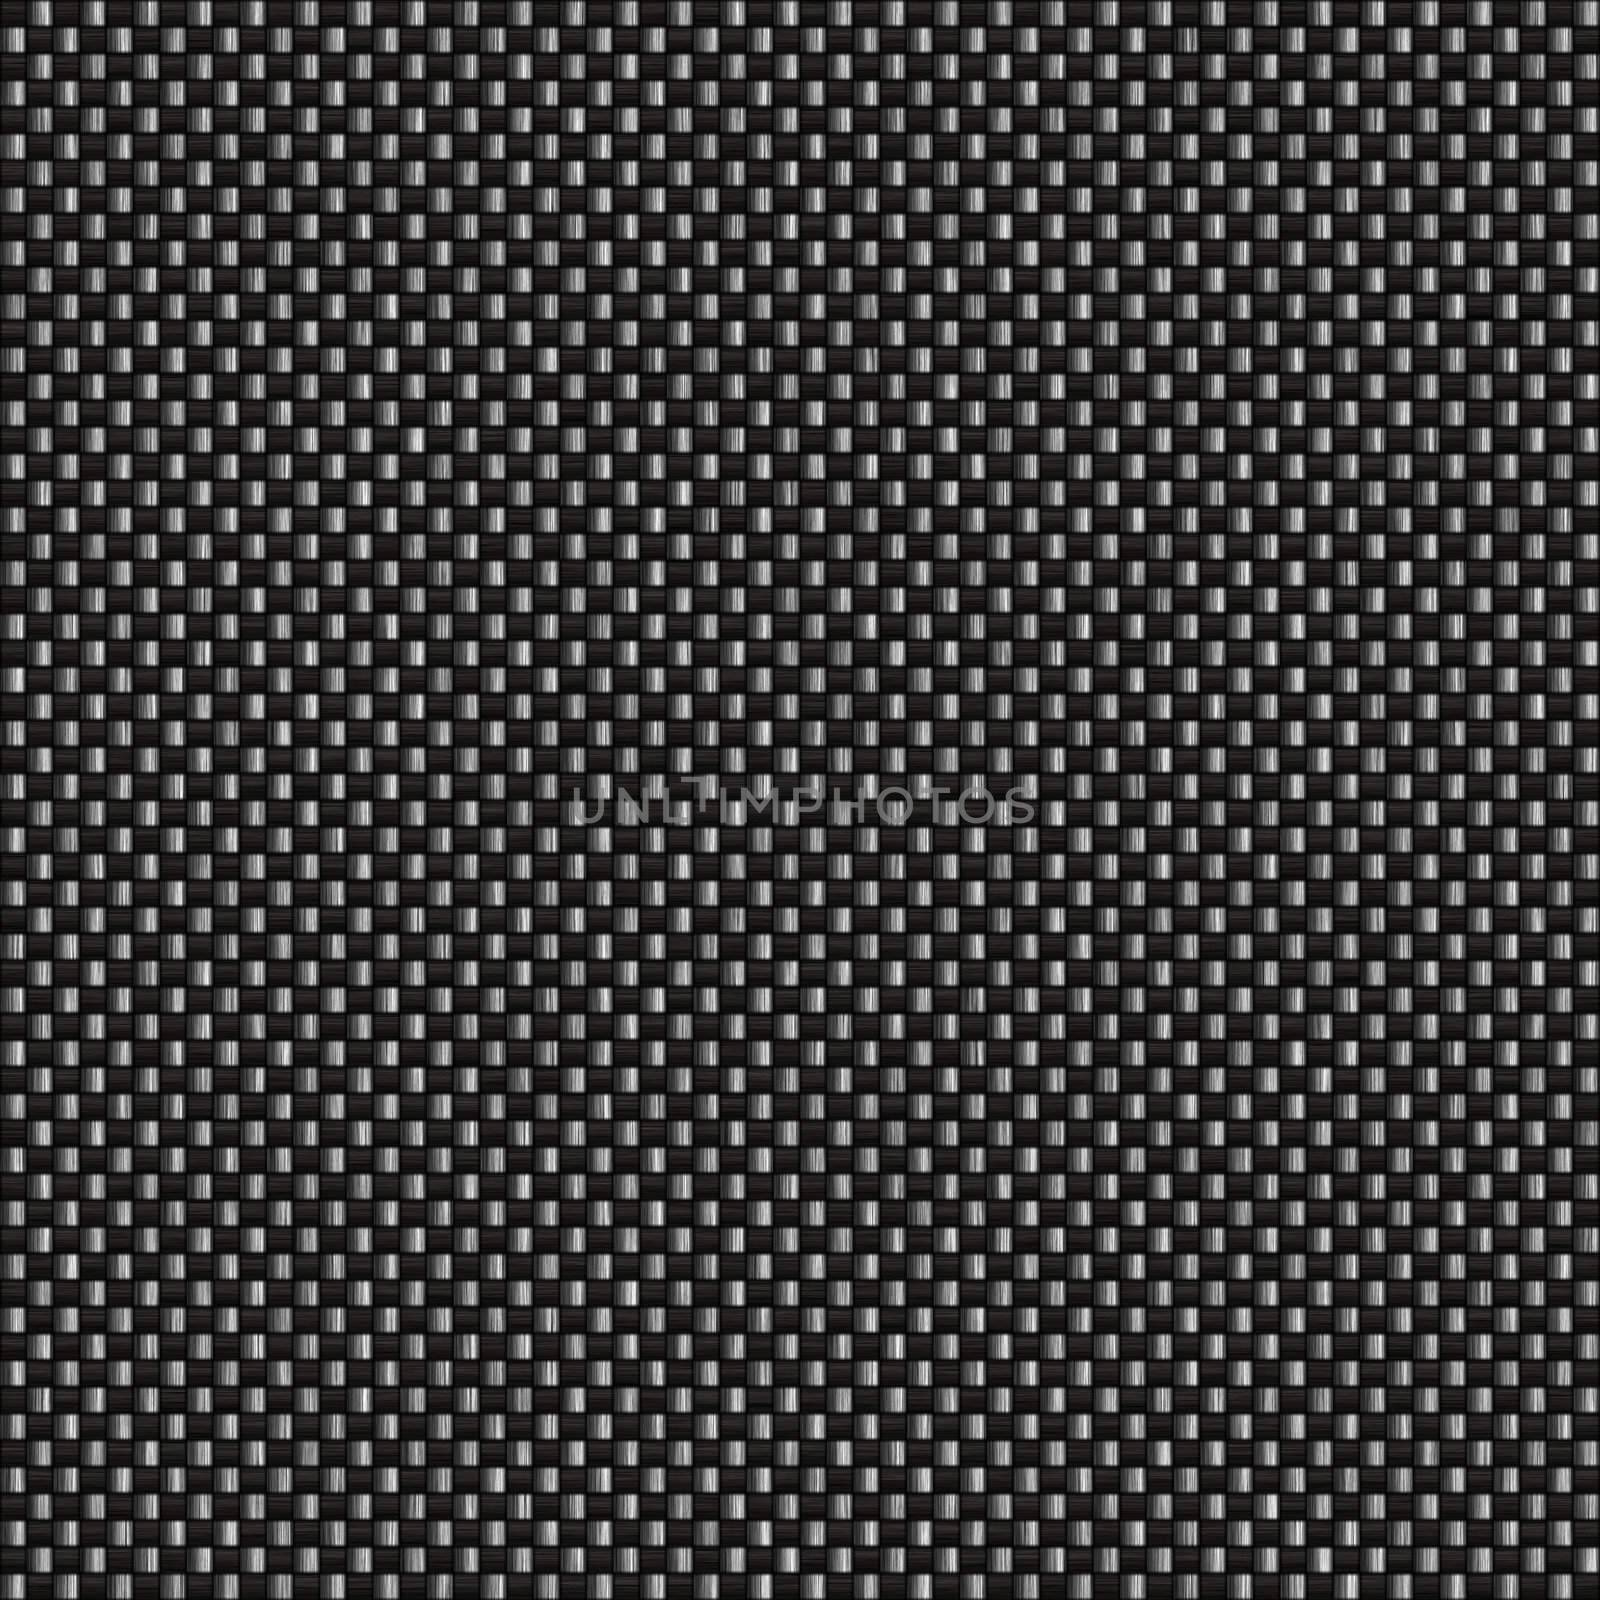 Carbon Fiber Seamless Pattern by graficallyminded